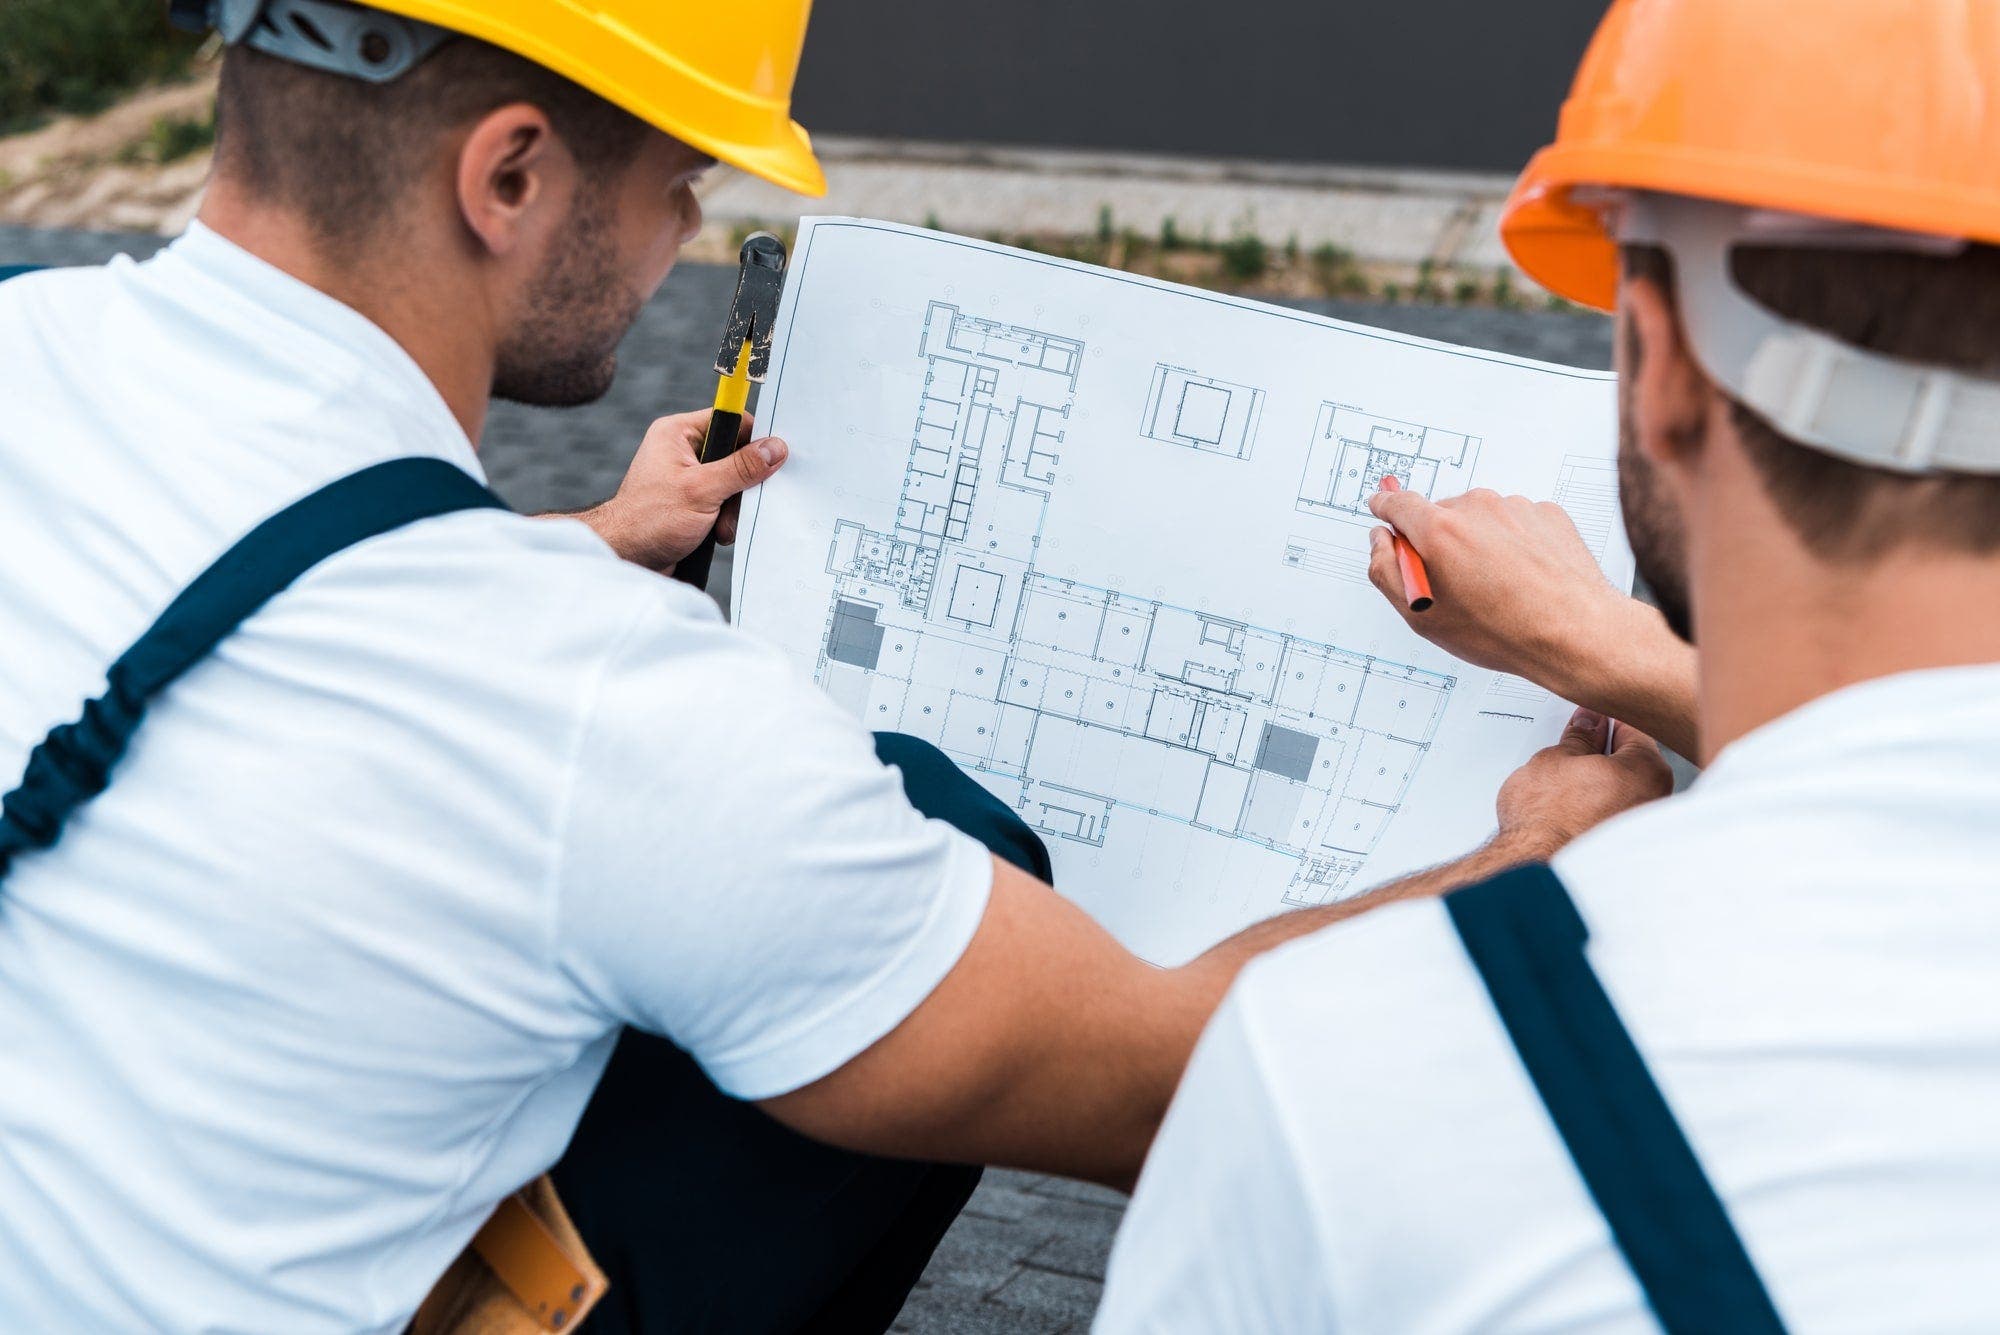 Two professional contractors in overalls and hardhats analyze a home blueprint for their project.